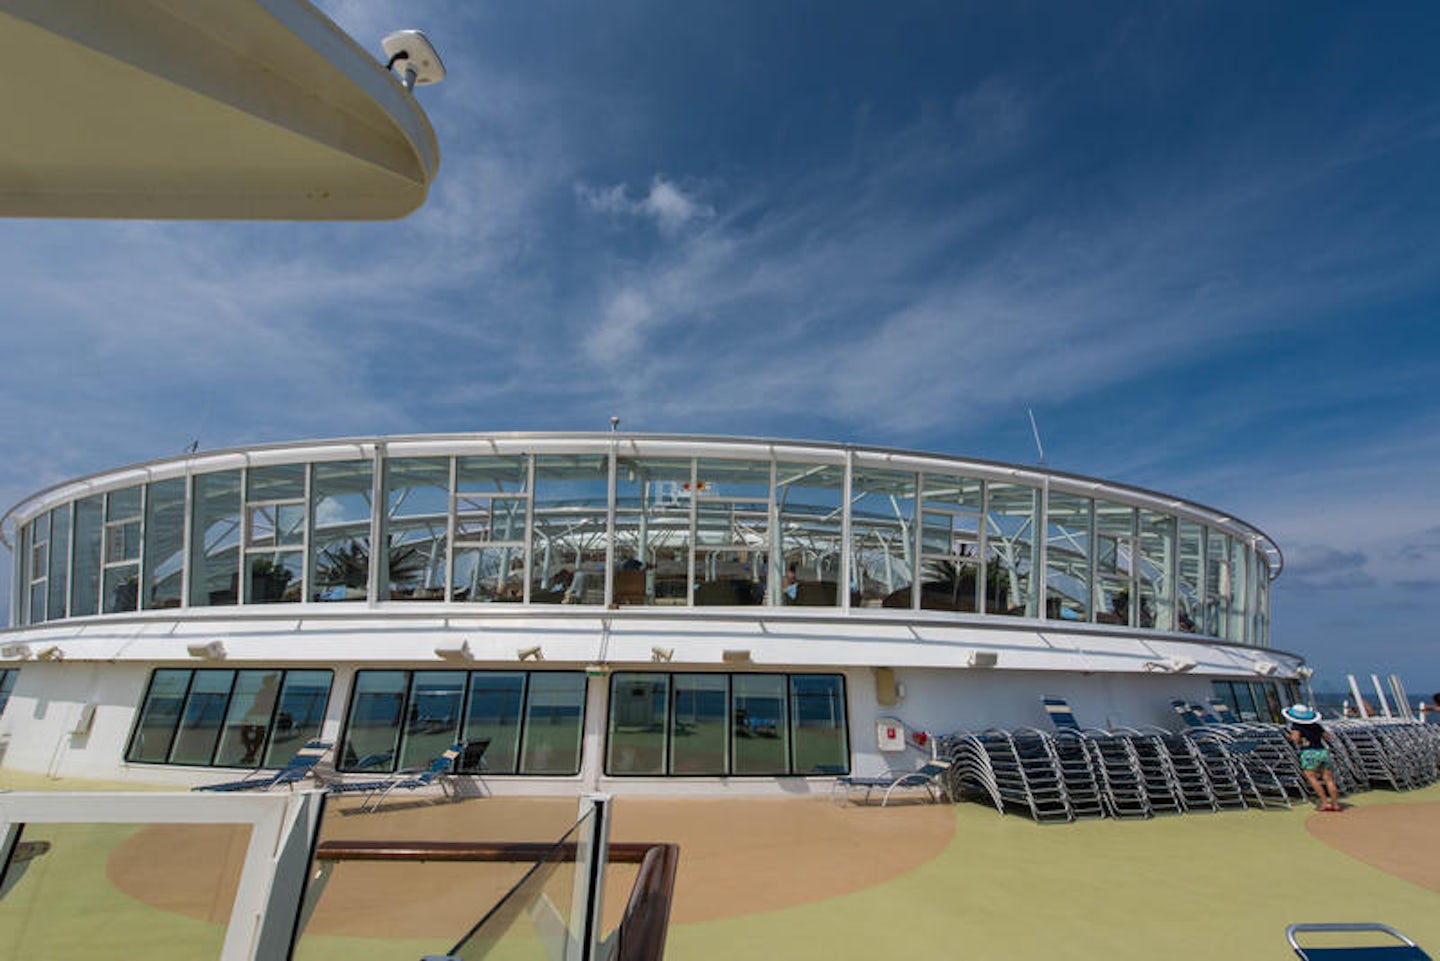 The Front Sun Decks and Helipad on Oasis of the Seas